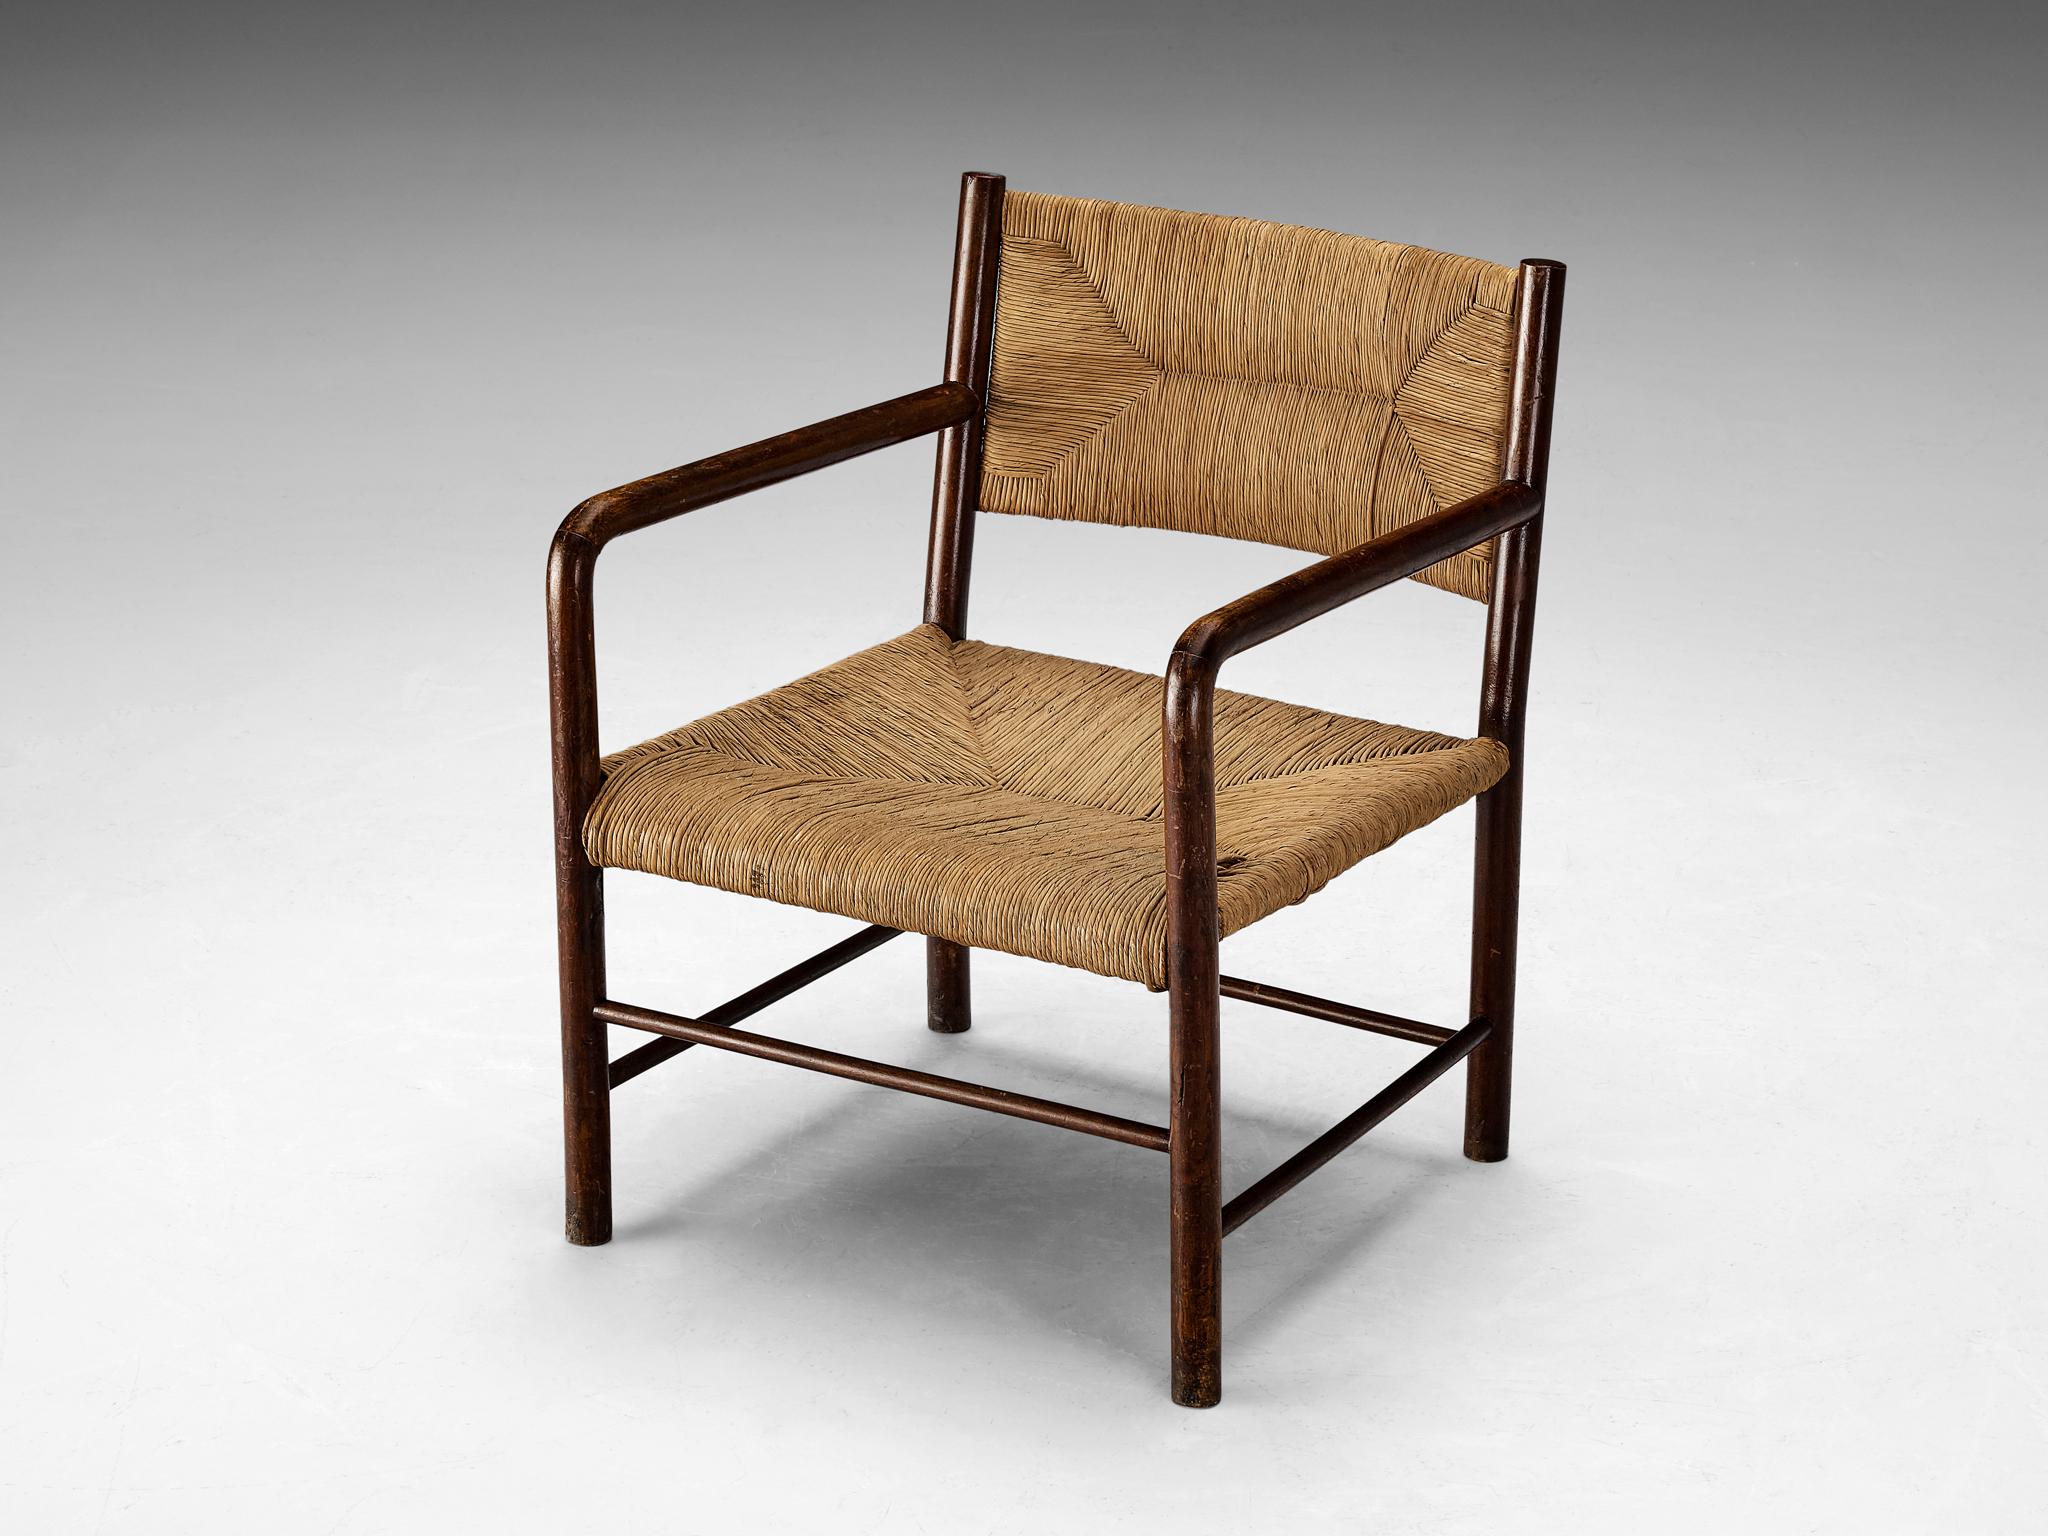 Emanuele Rambaldi for Chiappe, lounge chair, beech, straw, Chiavari, Italy, design 1930s, production afterwards

Italian painter and furniture designer Emanuele Rambaldi (1903-1968) created this charming chair. A similar model without armrests was